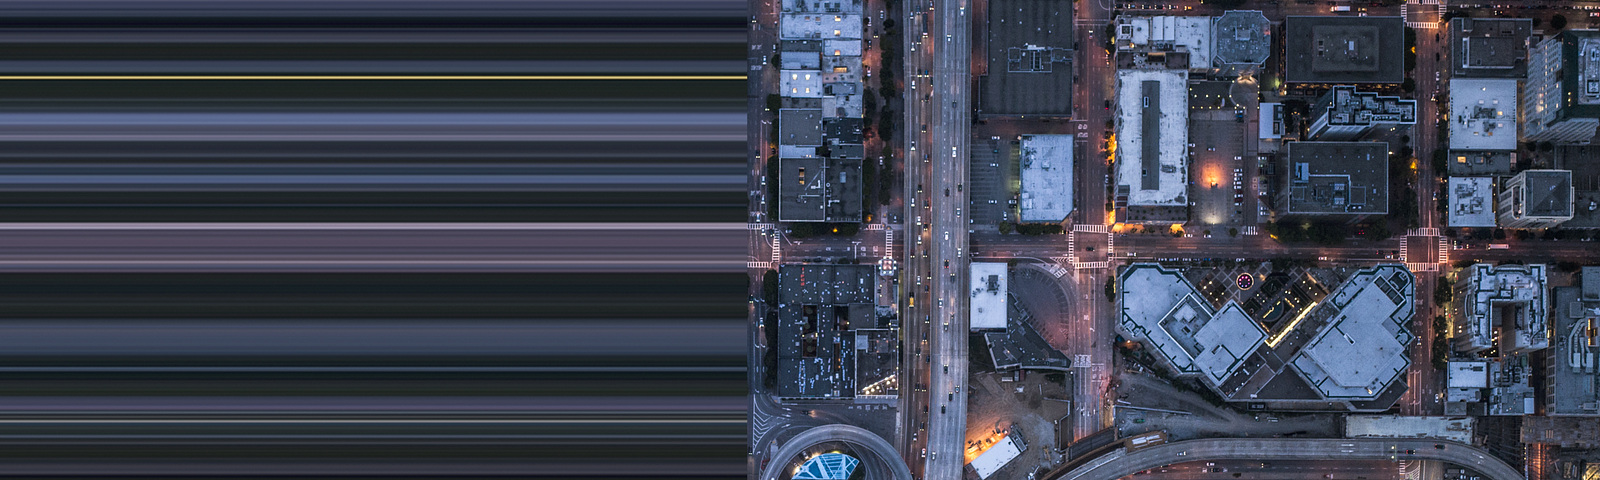 Aerial view of a city in the evening. The right side of the photo shows city blocks all lit up. The left side of the photo is stretched out and blurred.